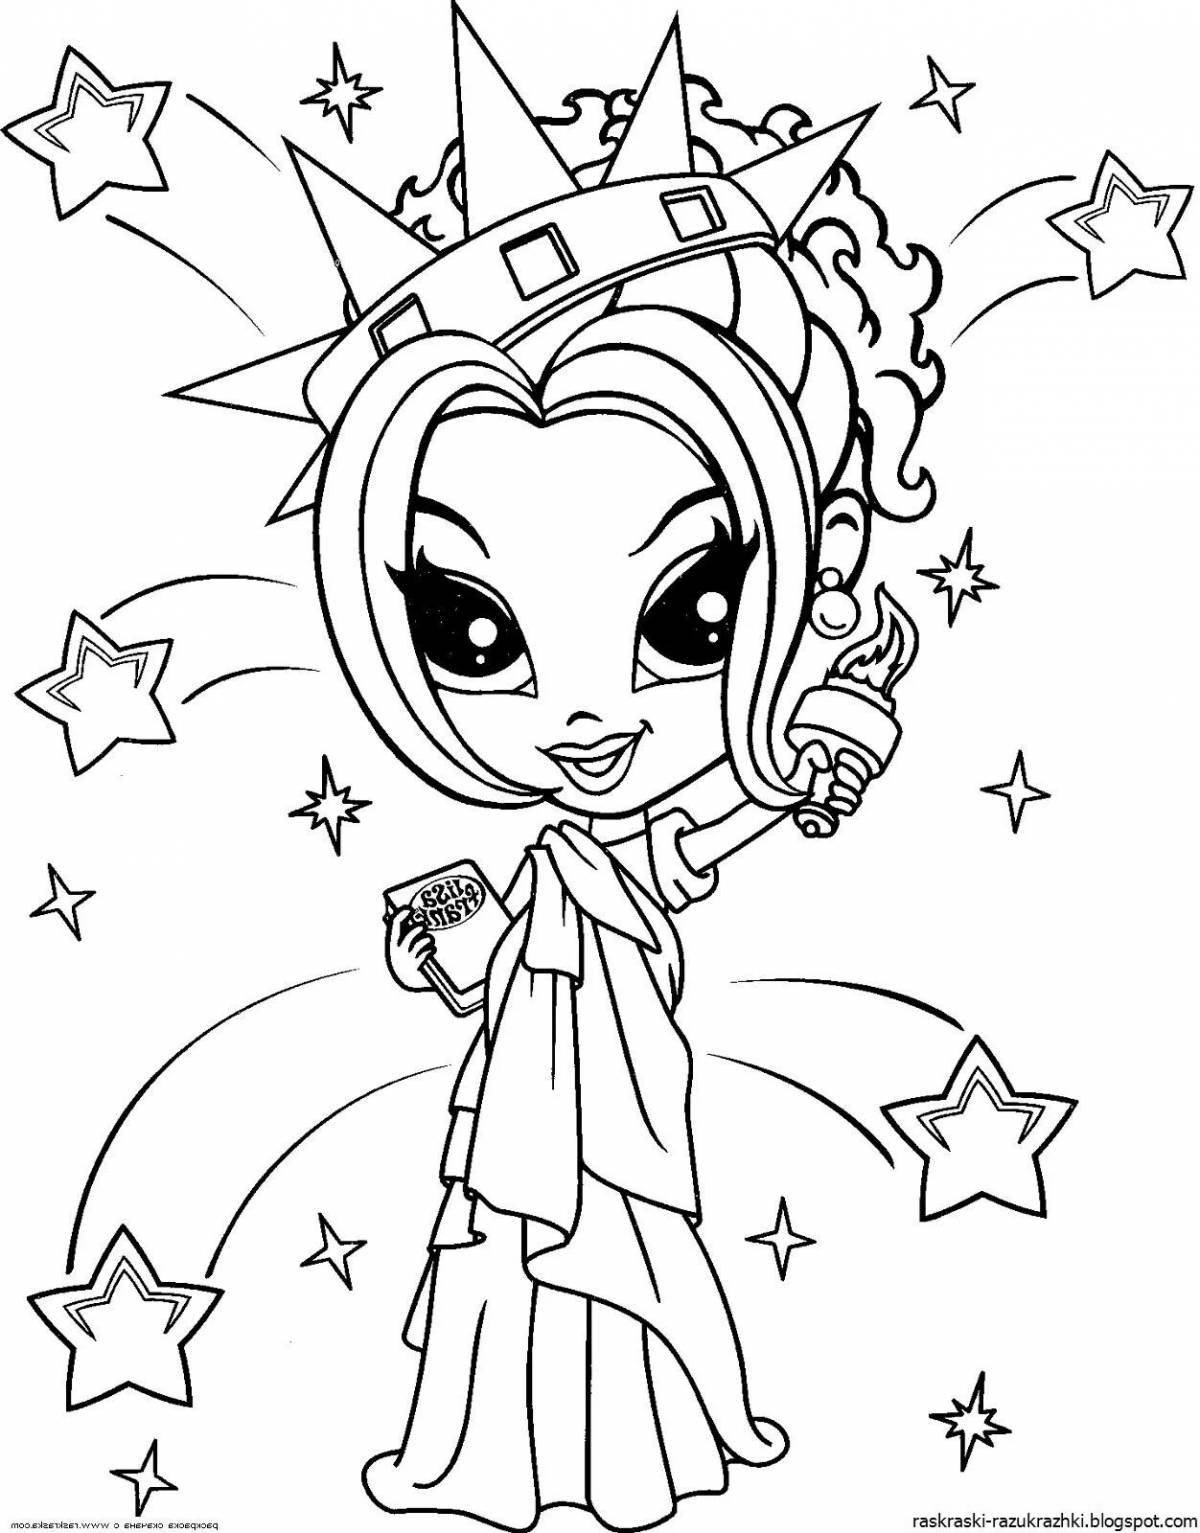 Brilliant coloring page 6 for girls